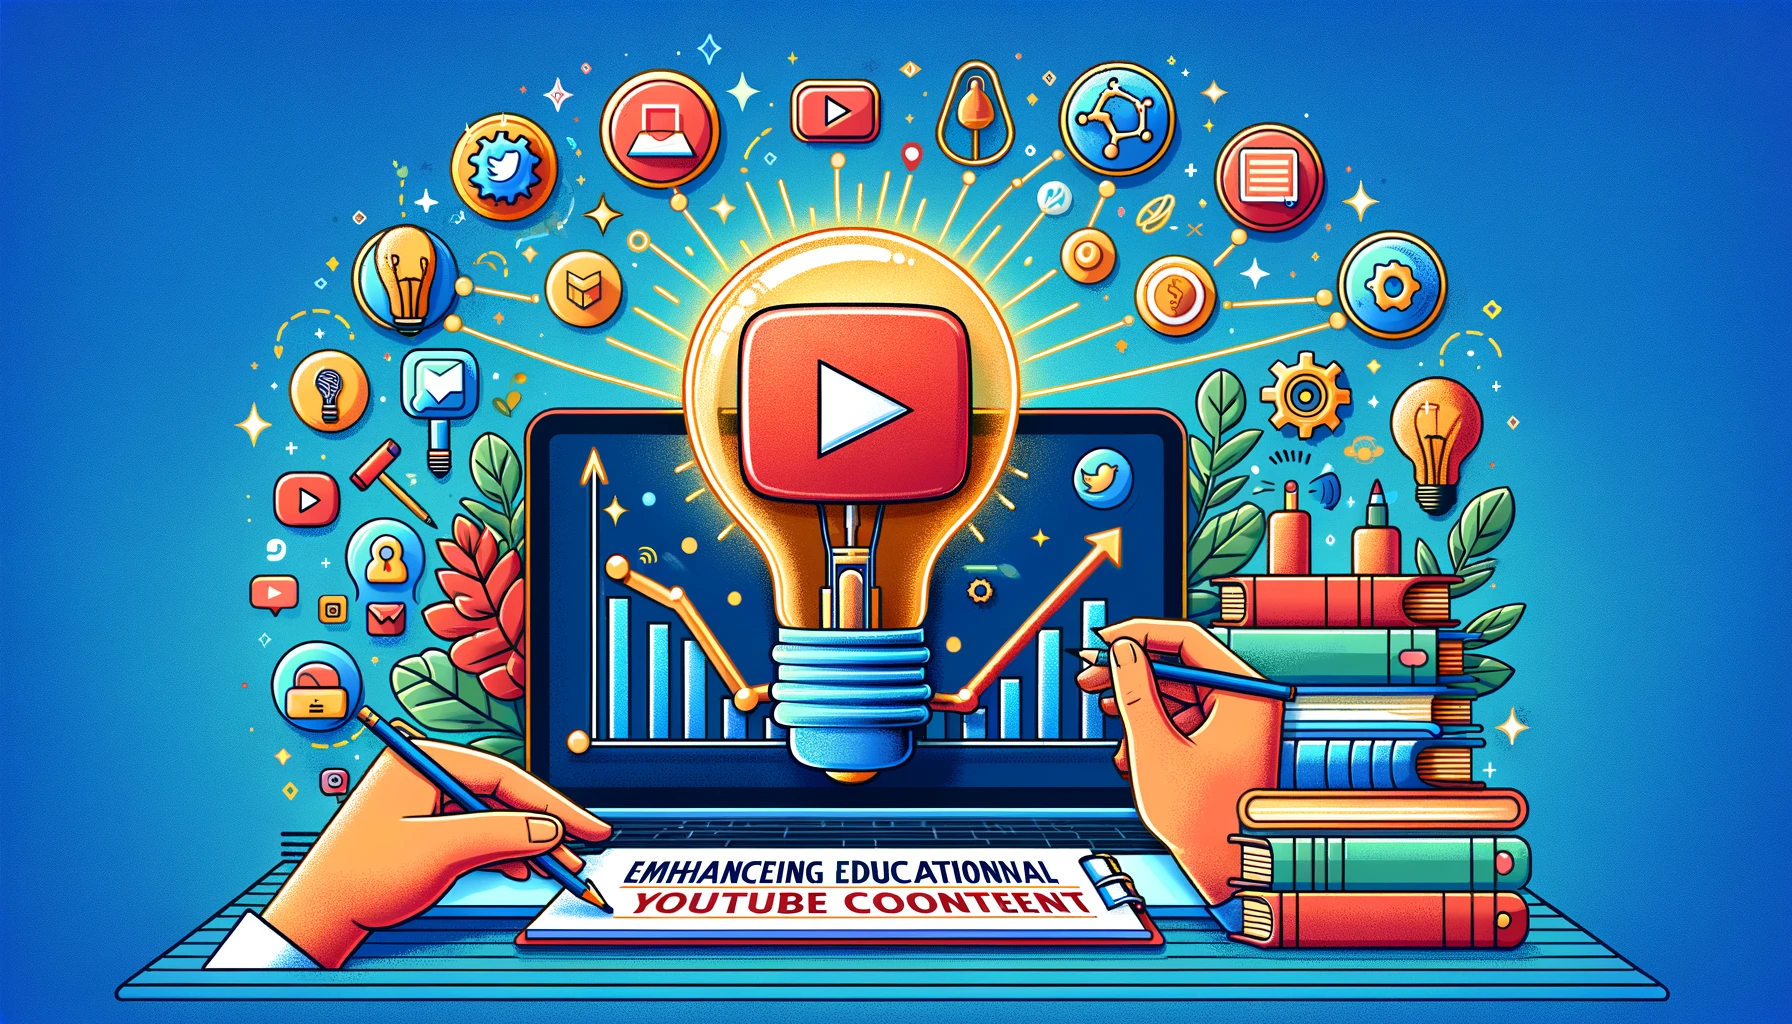 Creating Educational YouTube Content with Rank Panel Guidance